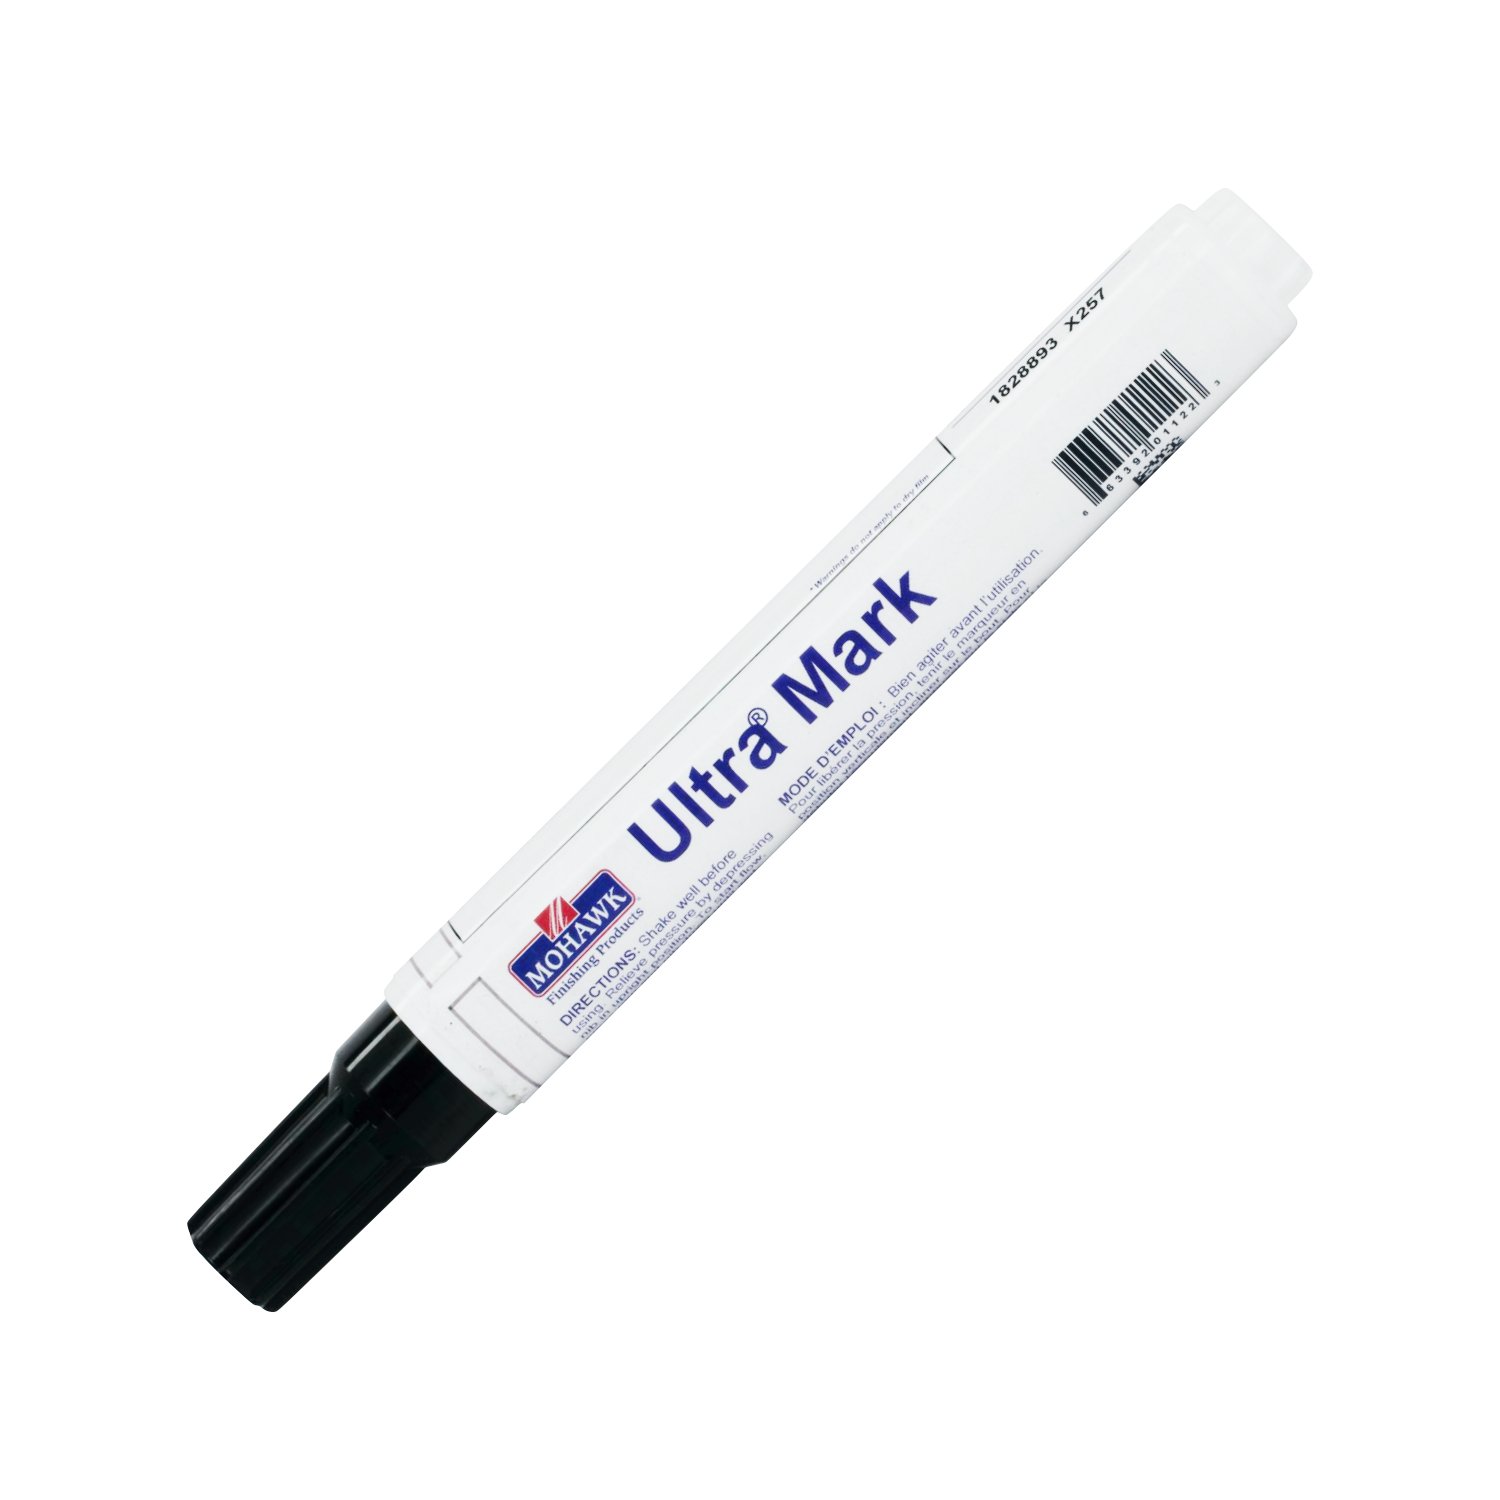 Mohawk Finishing Products Ultra Mark Wood Touch Up Marker for Paint or Stain (Black glaze)